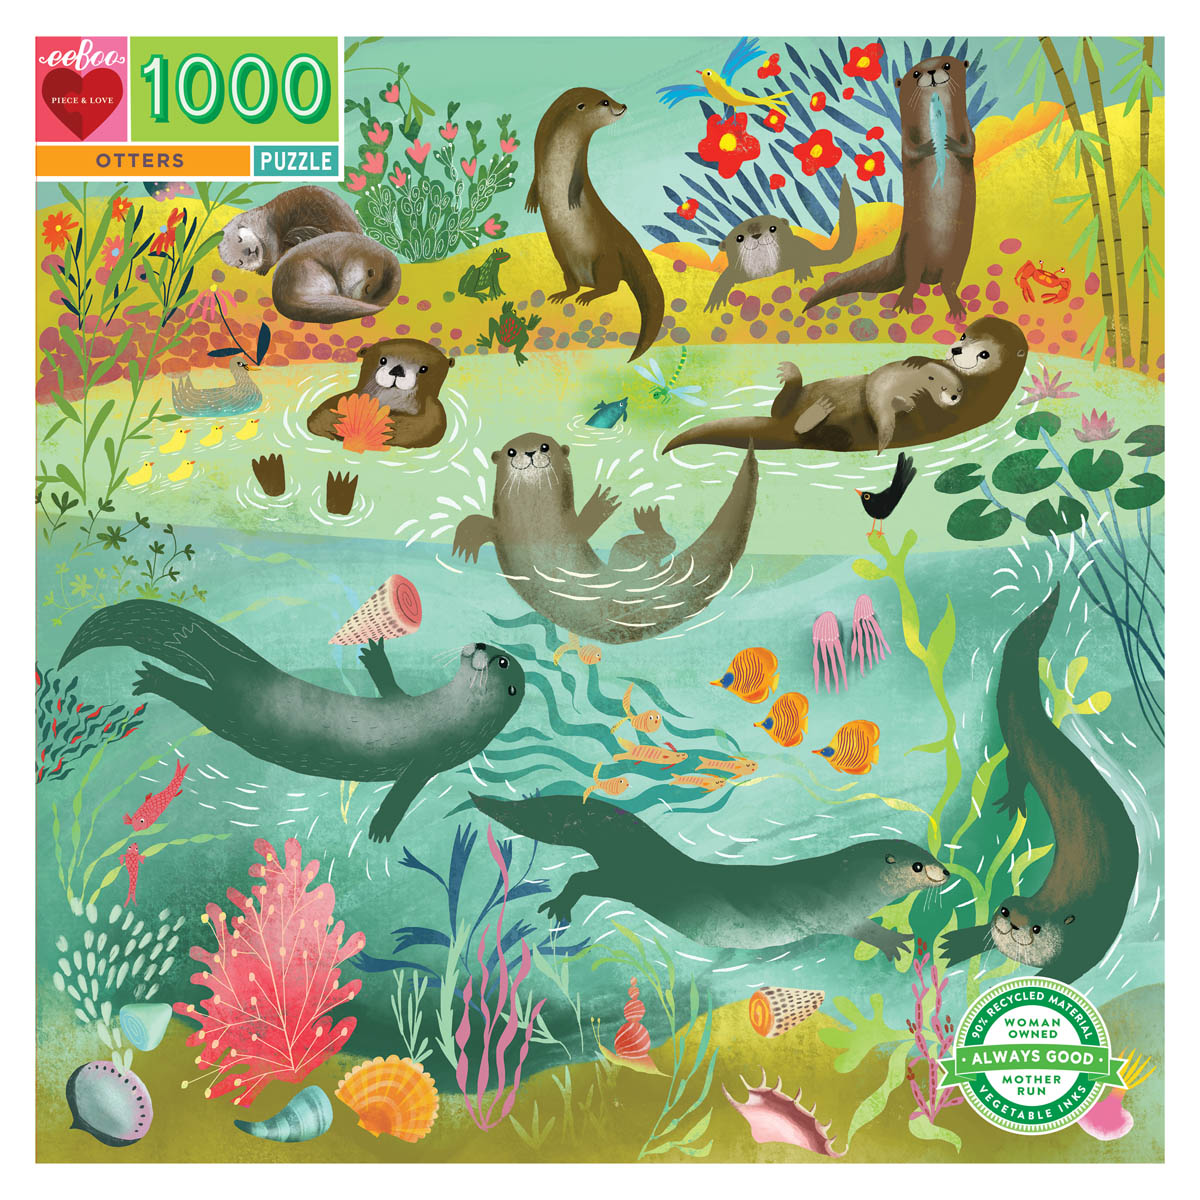 Mill & Hide - Bobangles - eeboo Puzzle 1000Pc - Otters